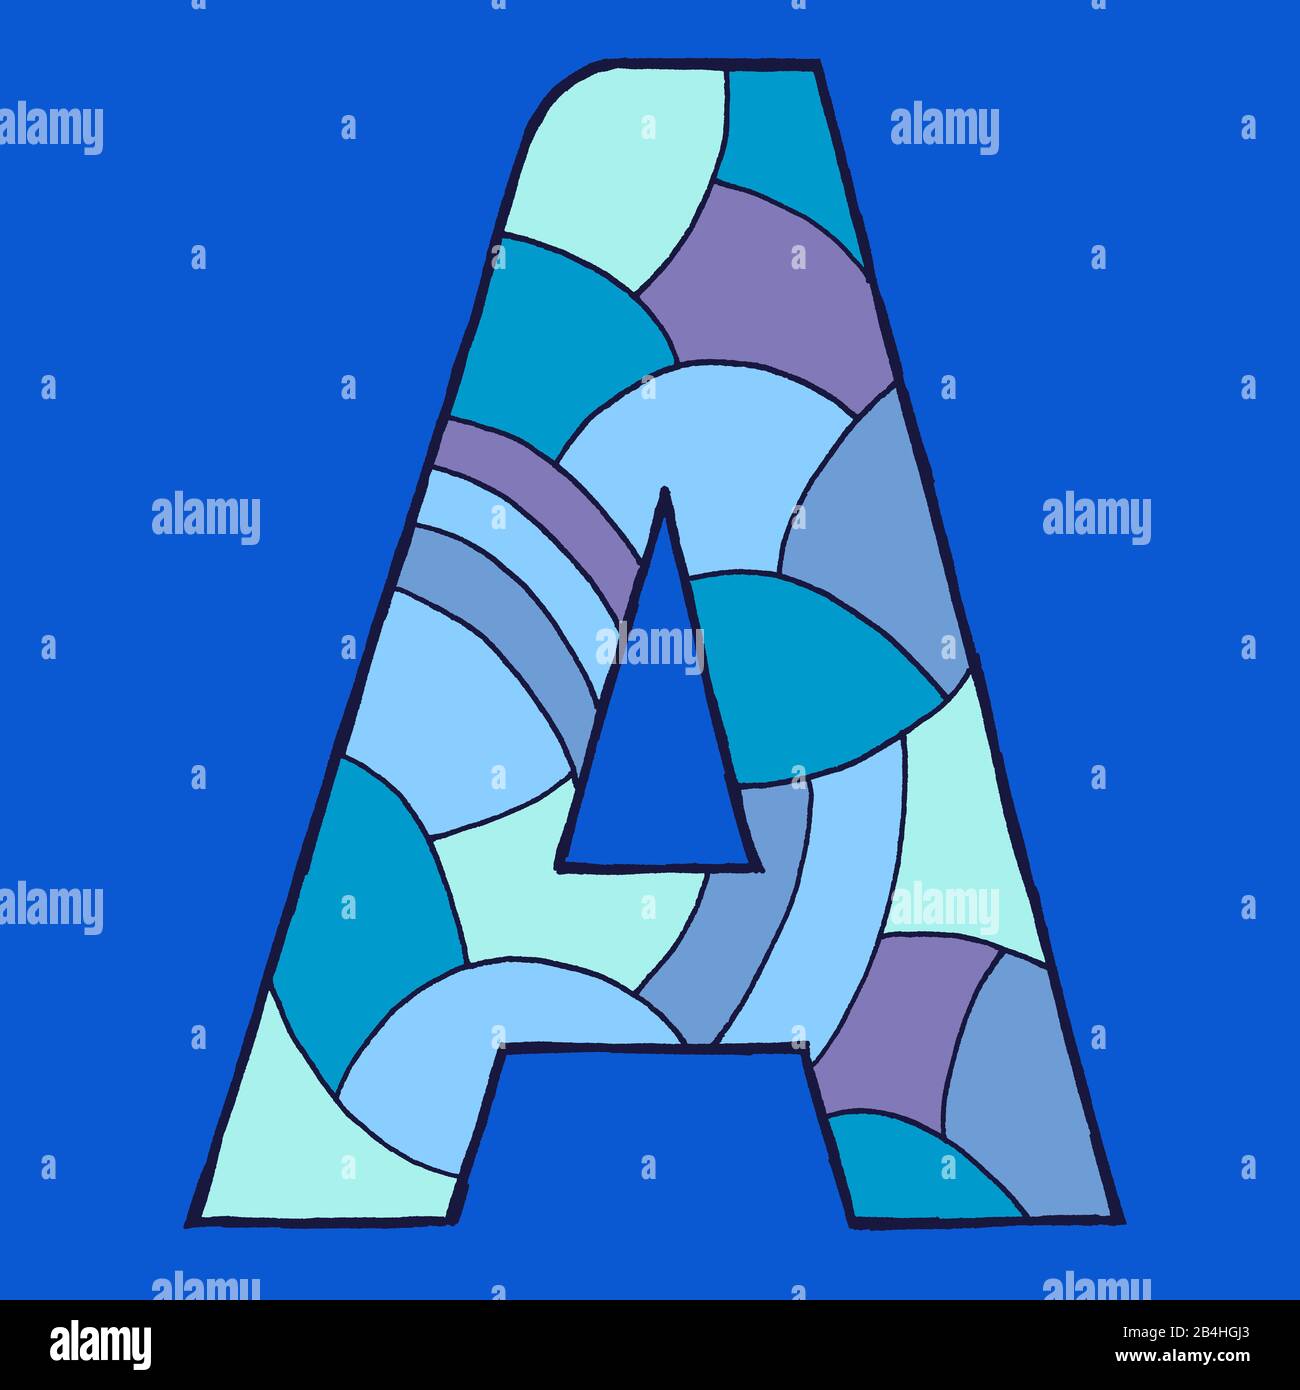 Letter A, drawn as a vector illustration, in blue shades on a blue background in pop art style Stock Photo